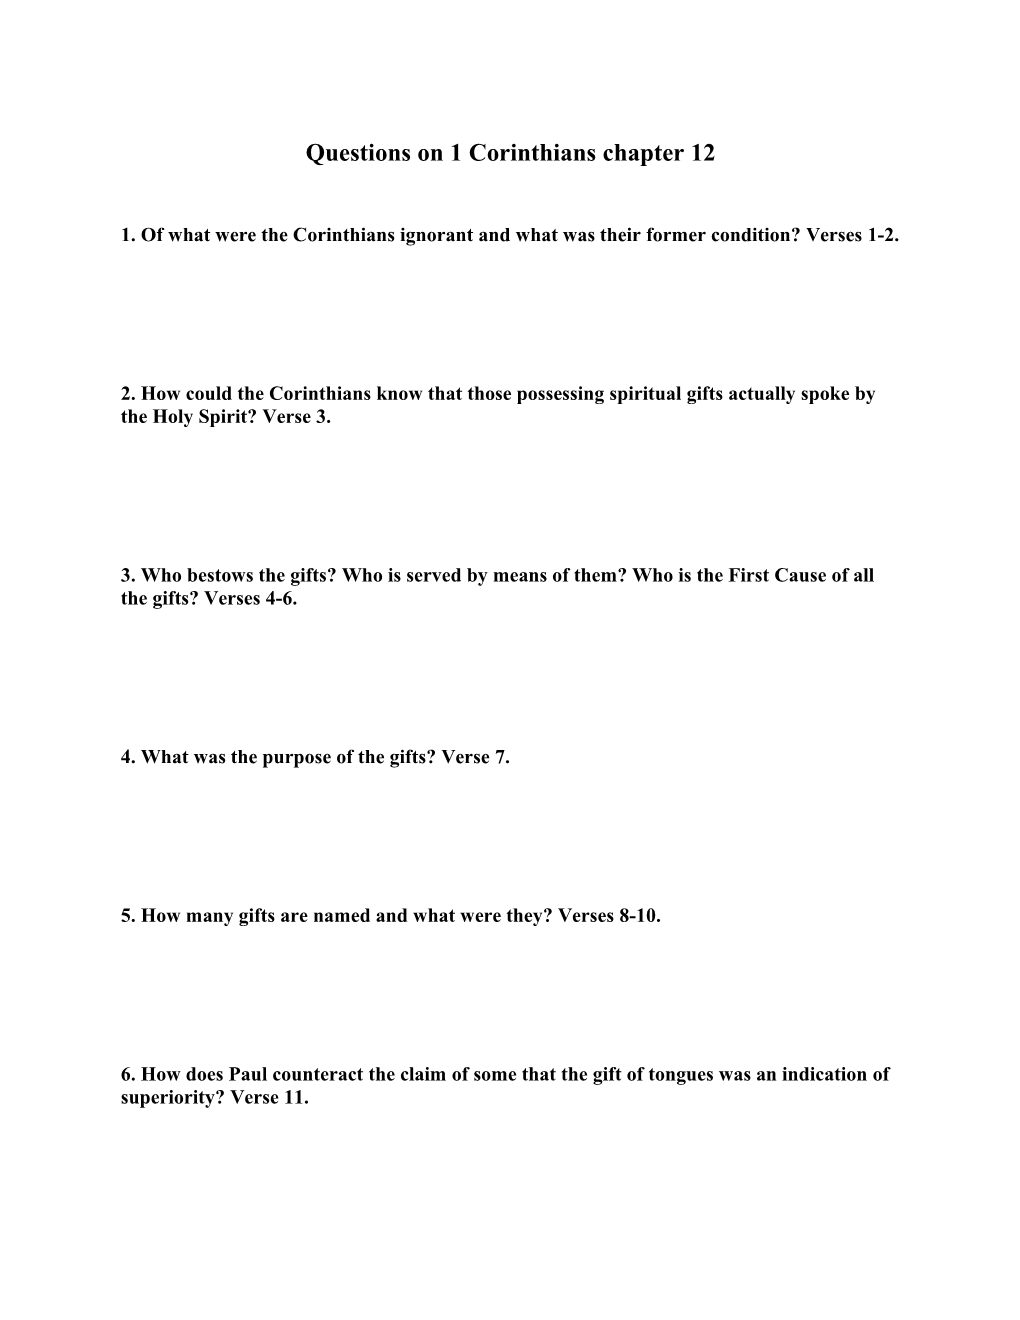 Questions on 1 Corinthians Chapter 12